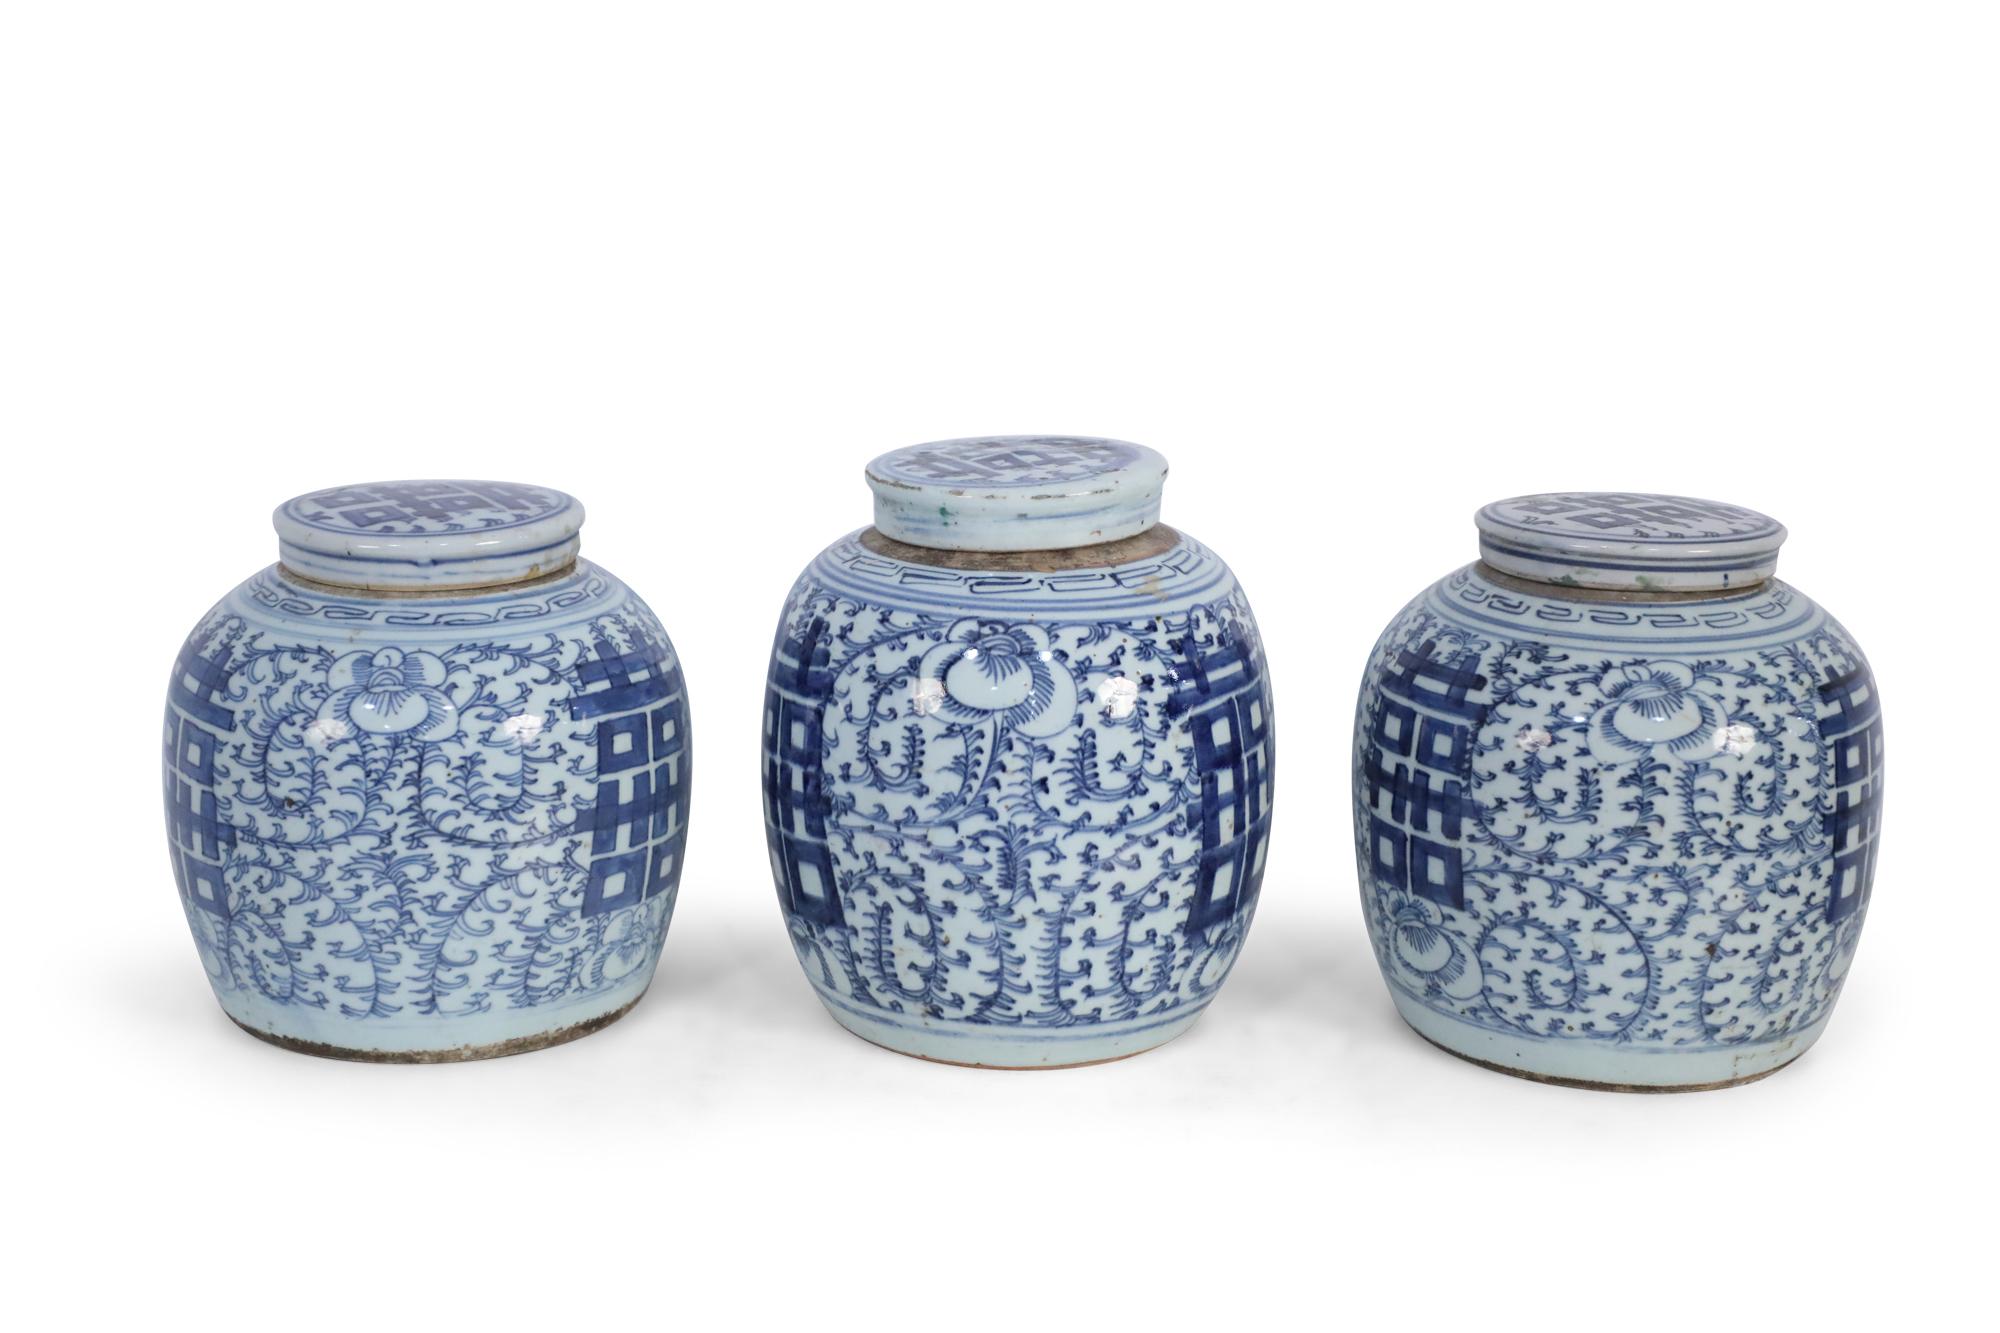 3 antique Chinese (Late 19th Century) similar ceramic ginger jars with blue floral designs surrounding bold, centered characters and geometric patterned bands leading to brown rustic stripes at the mouth openings. Each is topped with a lid depicting